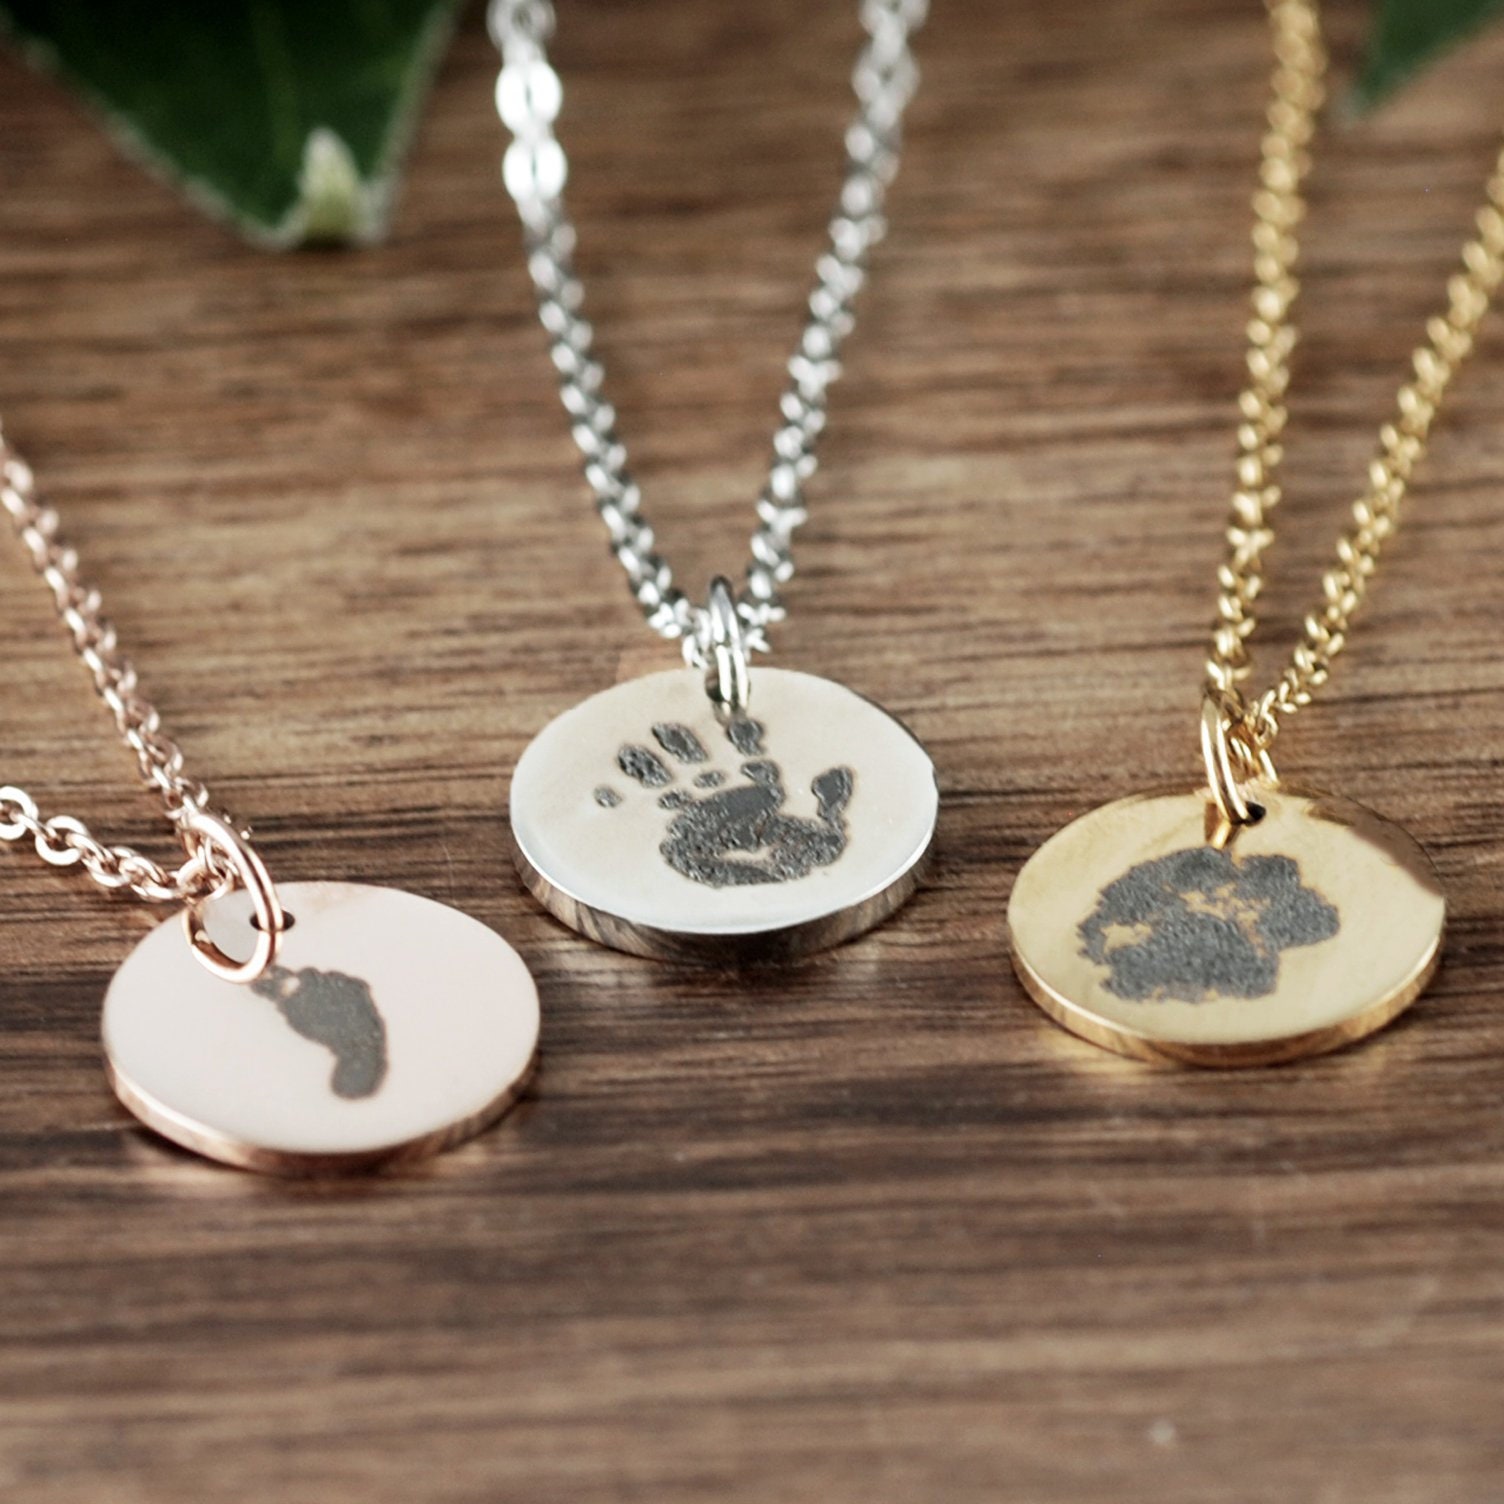 Actual Dog Paw Necklace, Actual Paw Print Necklace ...